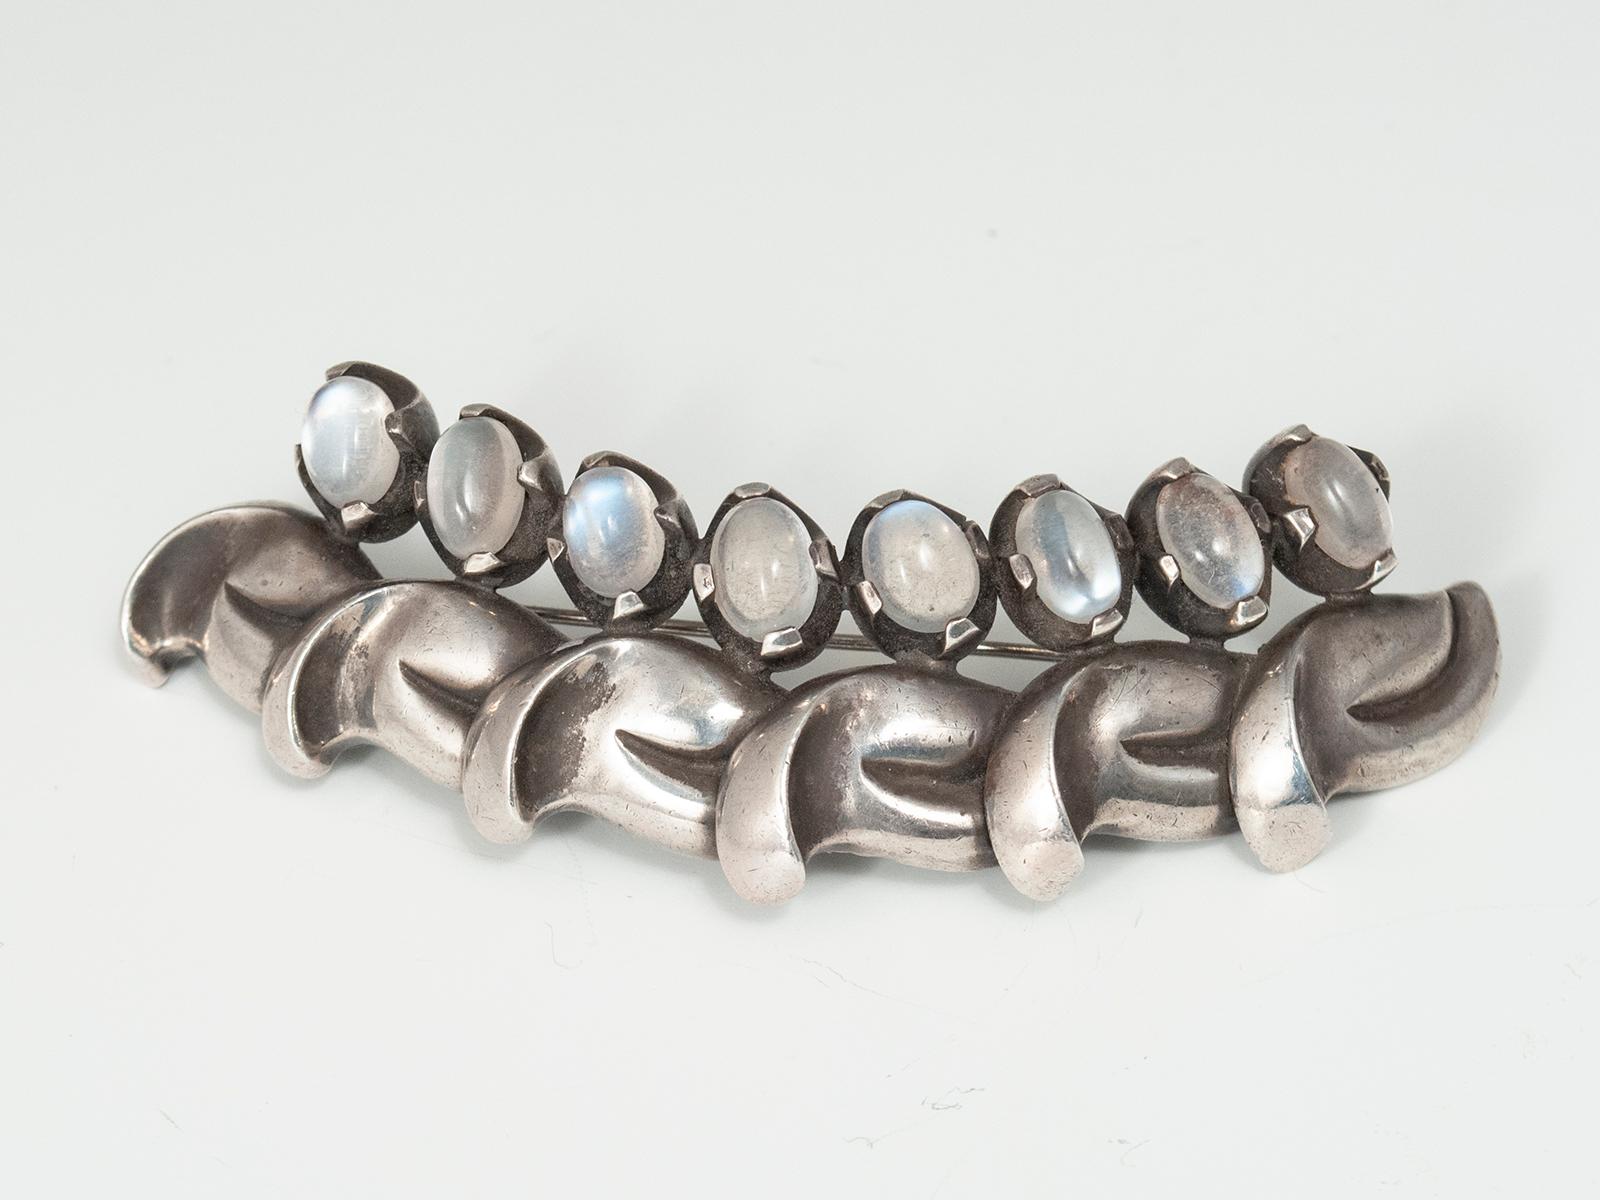 Mid-20th Century Antoñio Pineda (1919-2009) Silver and Moonstone Brooch, Taxco, Mexico

This beautifully crafted silver brooch contains eight oval-cut moonstone cabochons set in a curved row above six stylized leaves. The marks on the back of the